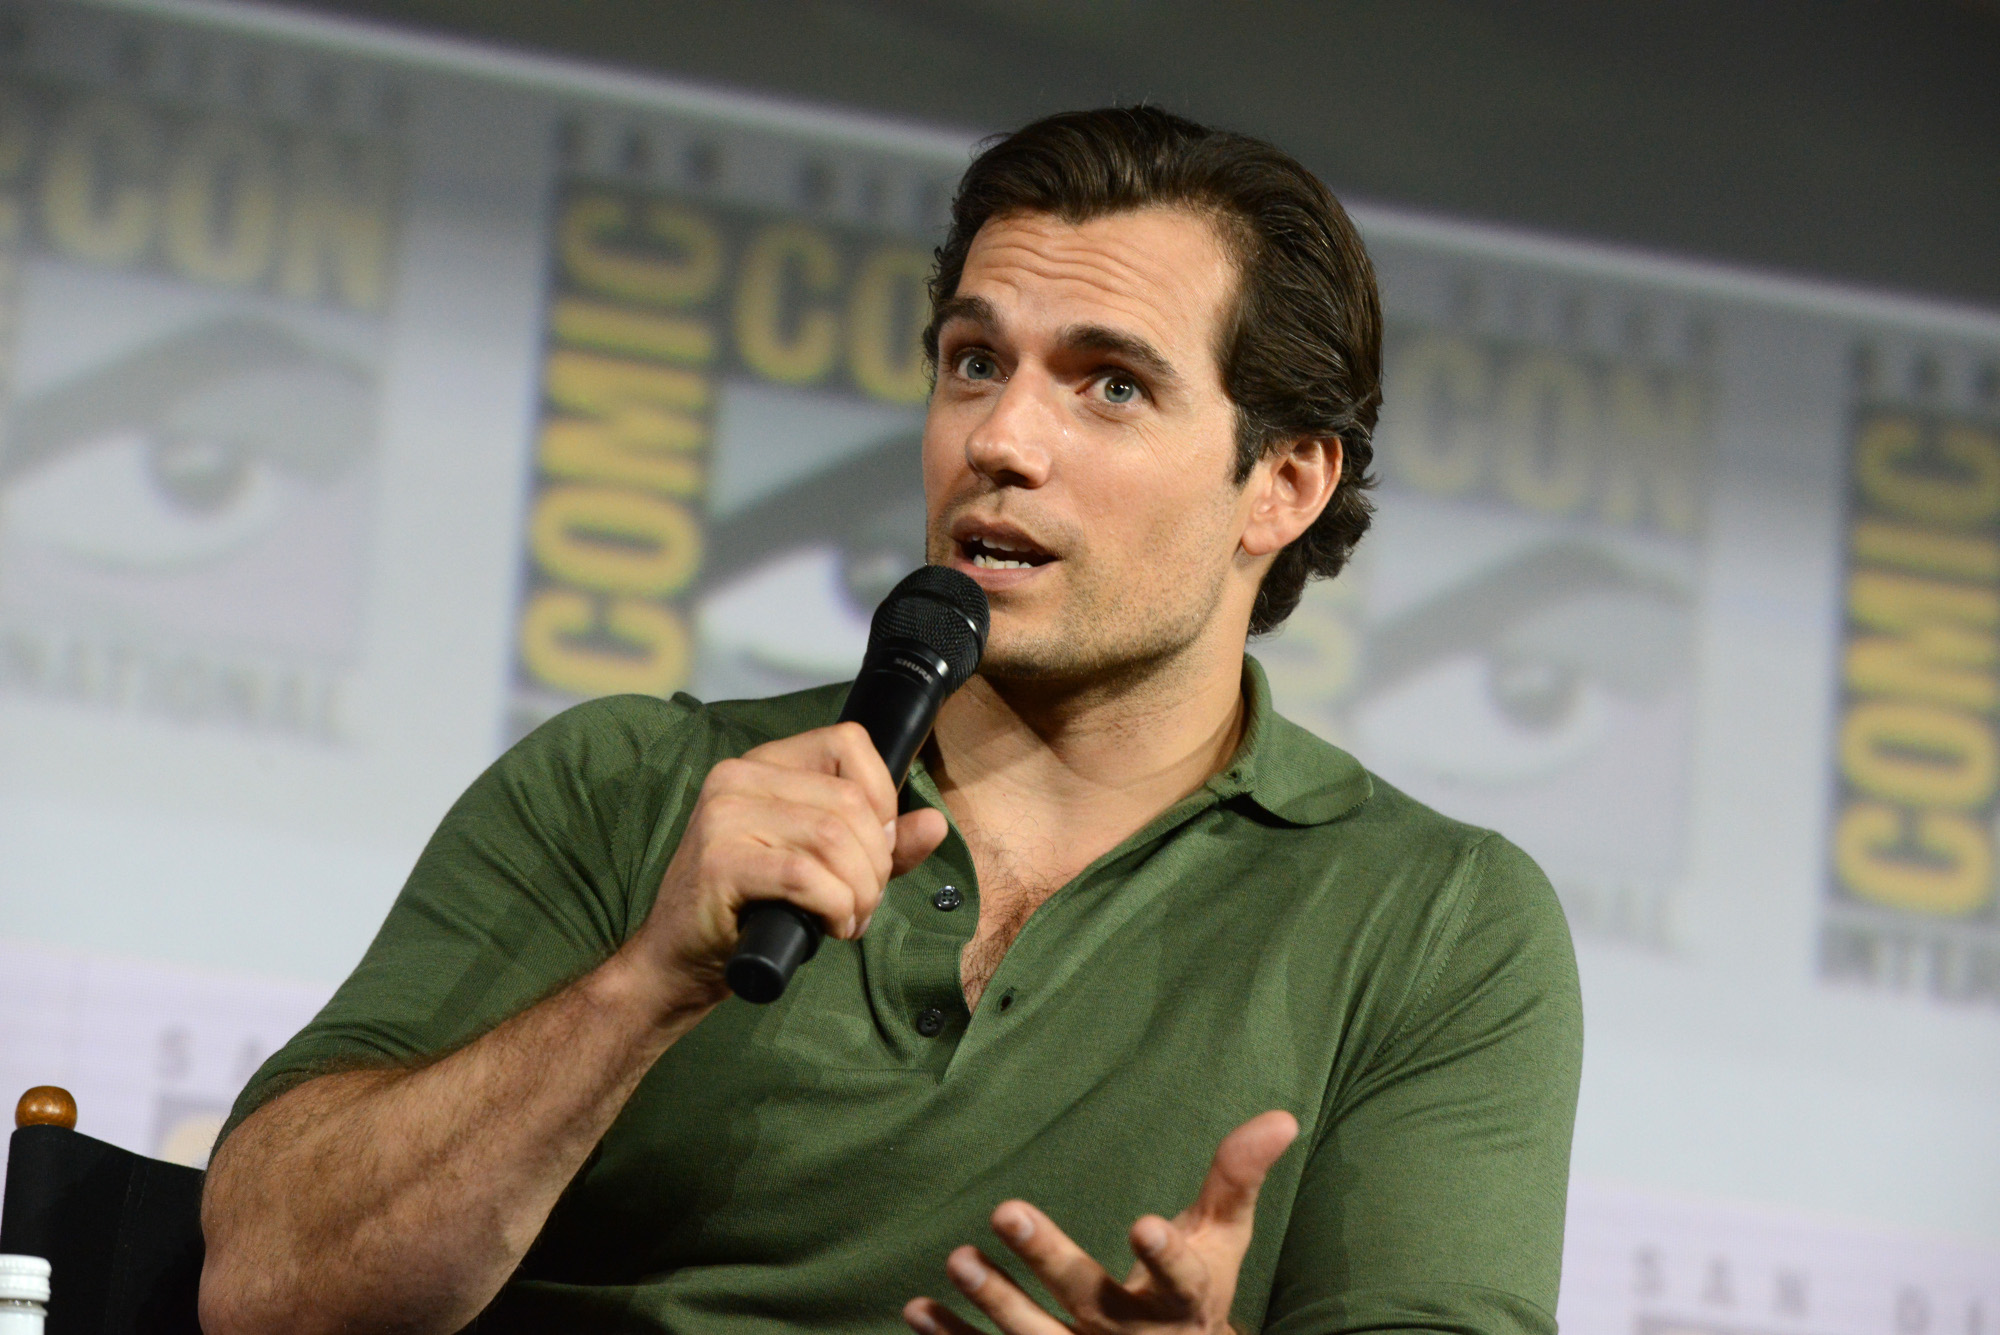 Henry Cavill, who almost played James Bond, wearing a great polo shirt and holding a microphone on a Comic-Con panel. He's sitting and there is a Comic-Con wall behind him.